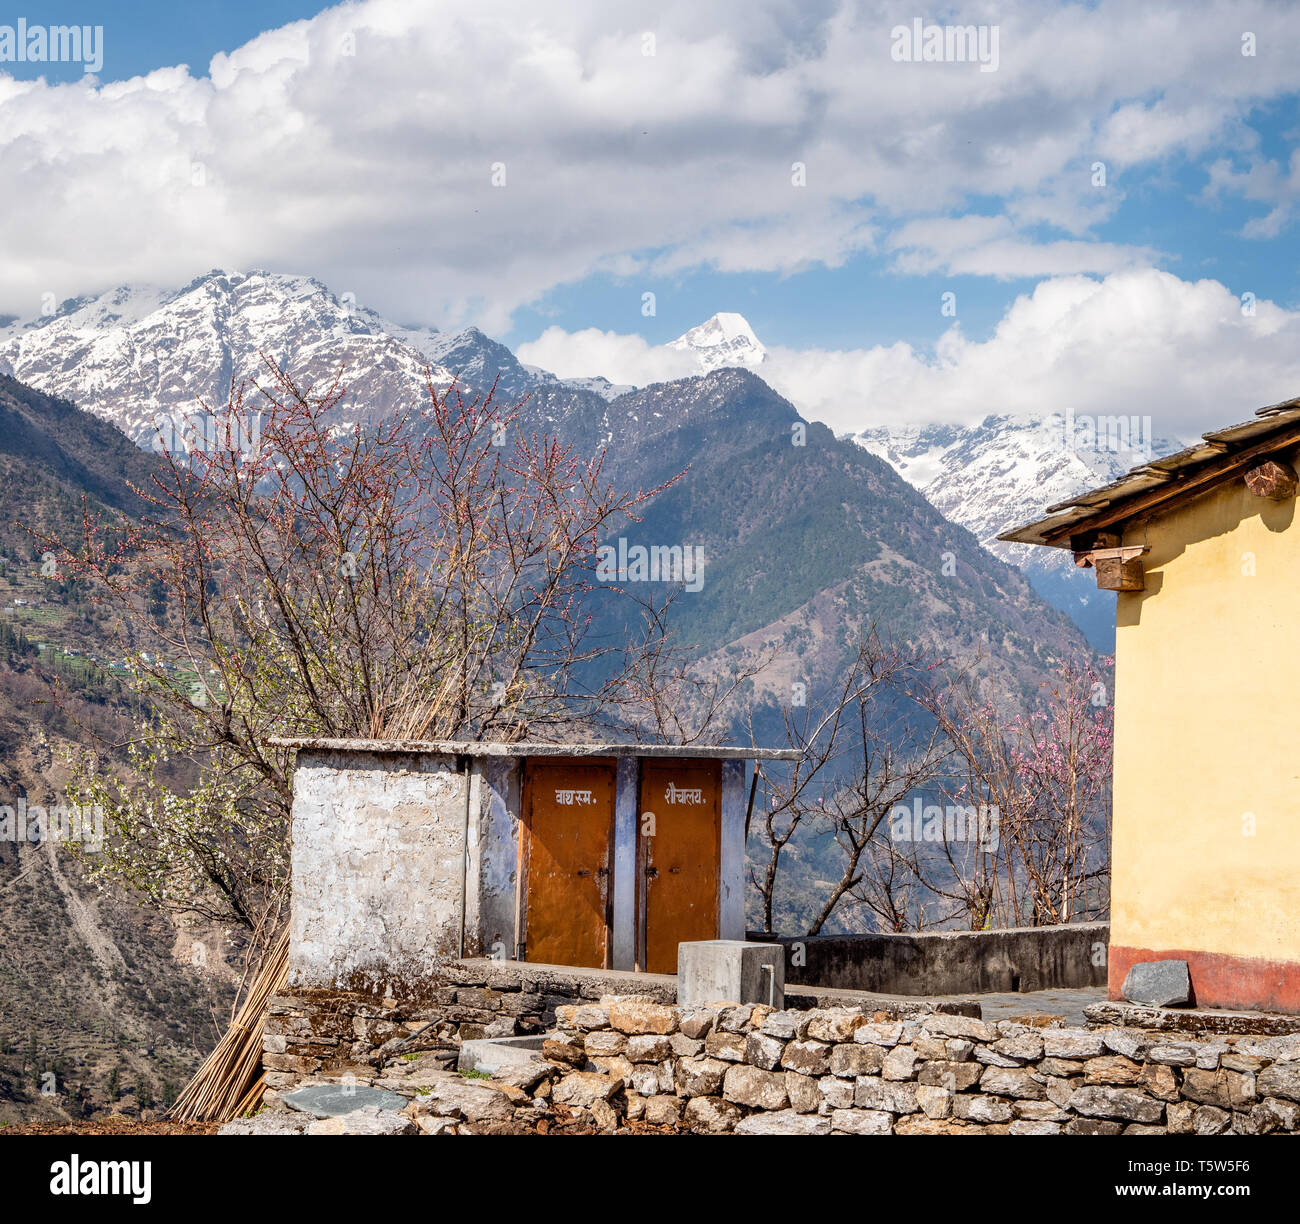 Toilets with a view - outside lavatories in Supi village with views over the high Himalayas Nanda Kot and the Pindar Valley in Uttarakhand India Stock Photo